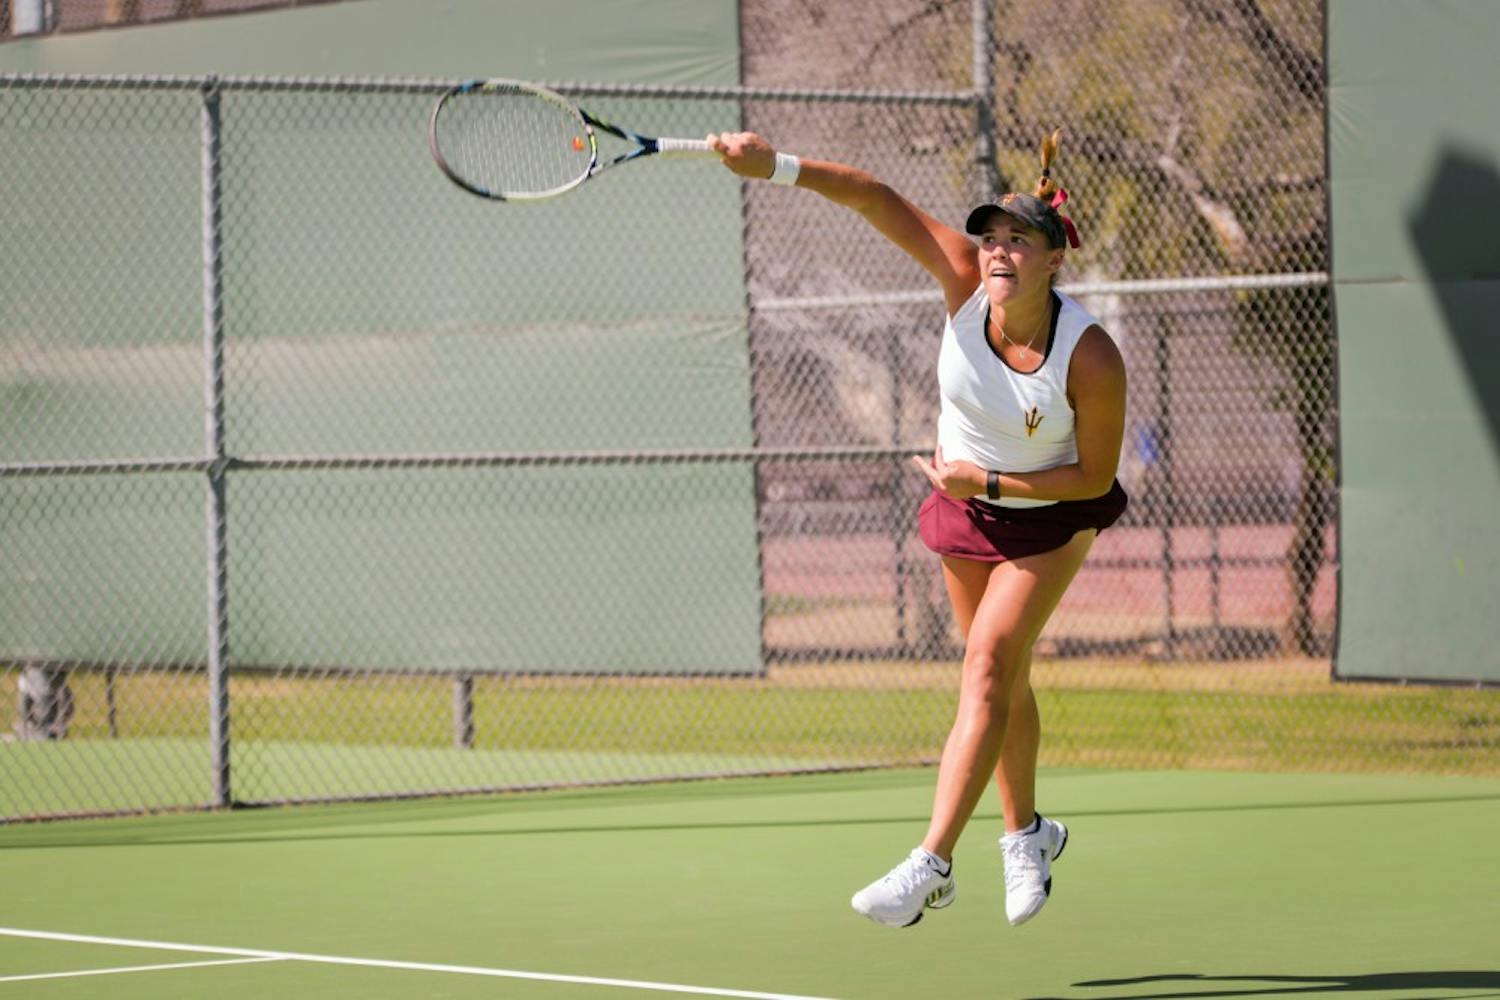 Kassidy Jump serves the  ball during a doubles match-up against the California Bears on Friday,  March 4, 2016, at the Whiteman Tennis Center in Tempe, AZ. 